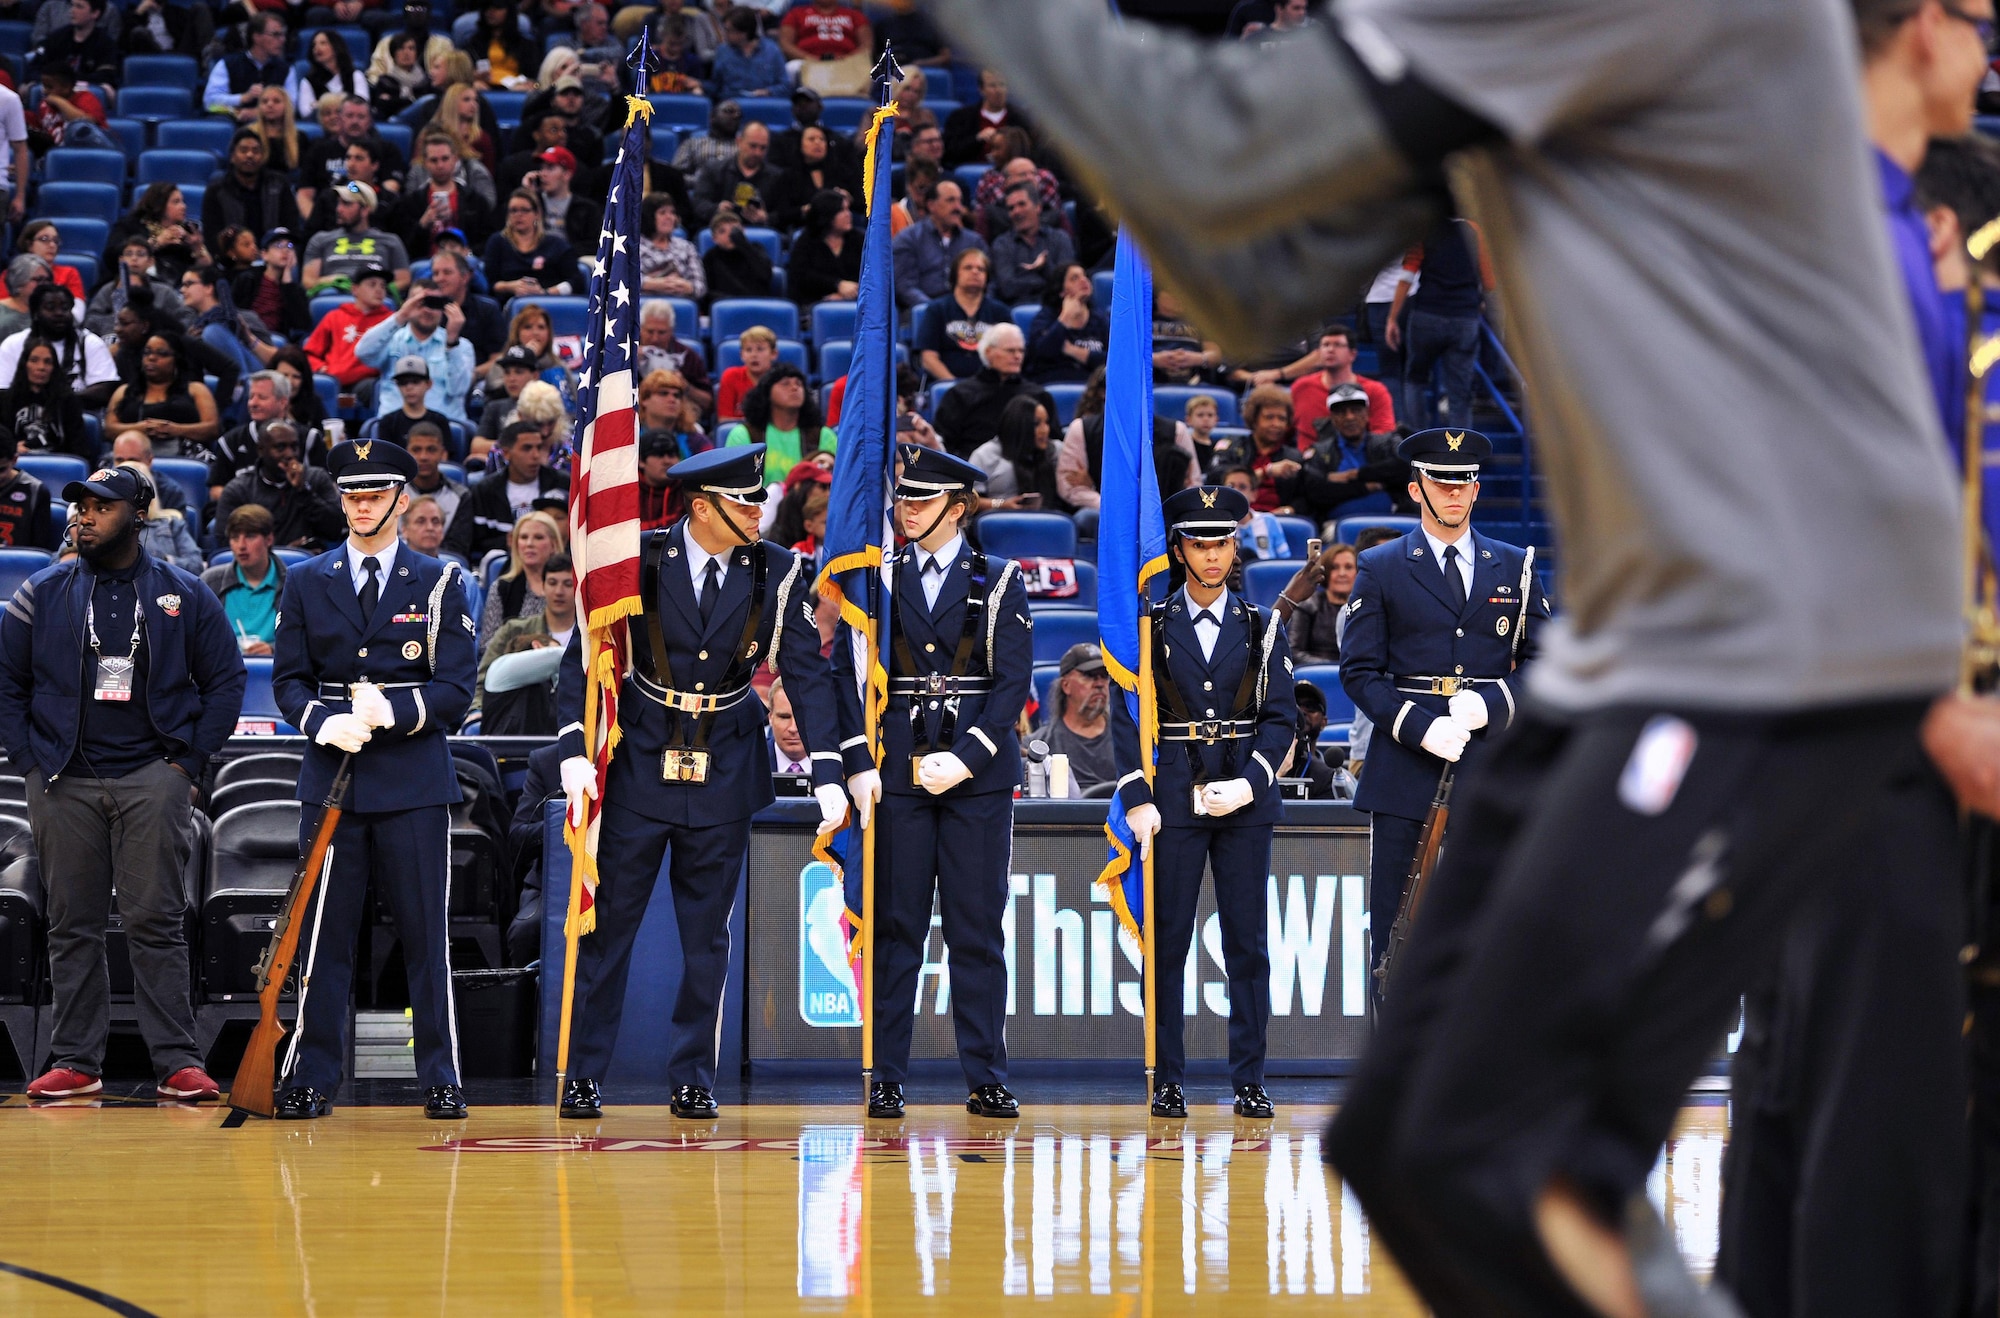 Staff Sgt. Anthony O’Conner-Geiling, Keesler Honor Guard Charlie Flight NCO in charge, does a final check of his Airmen before presenting the colors at a New Orleans Pelicans NBA game at the Smoothie King Center, March 3, 2017, in New Orleans. Each year, the Keesler Honor Guard performs hundreds of ceremonial details across Louisiana and Mississippi, including funerals, ceremonies, sporting events and parades. (U.S. Air Force photo by Senior Airman Duncan McElroy)